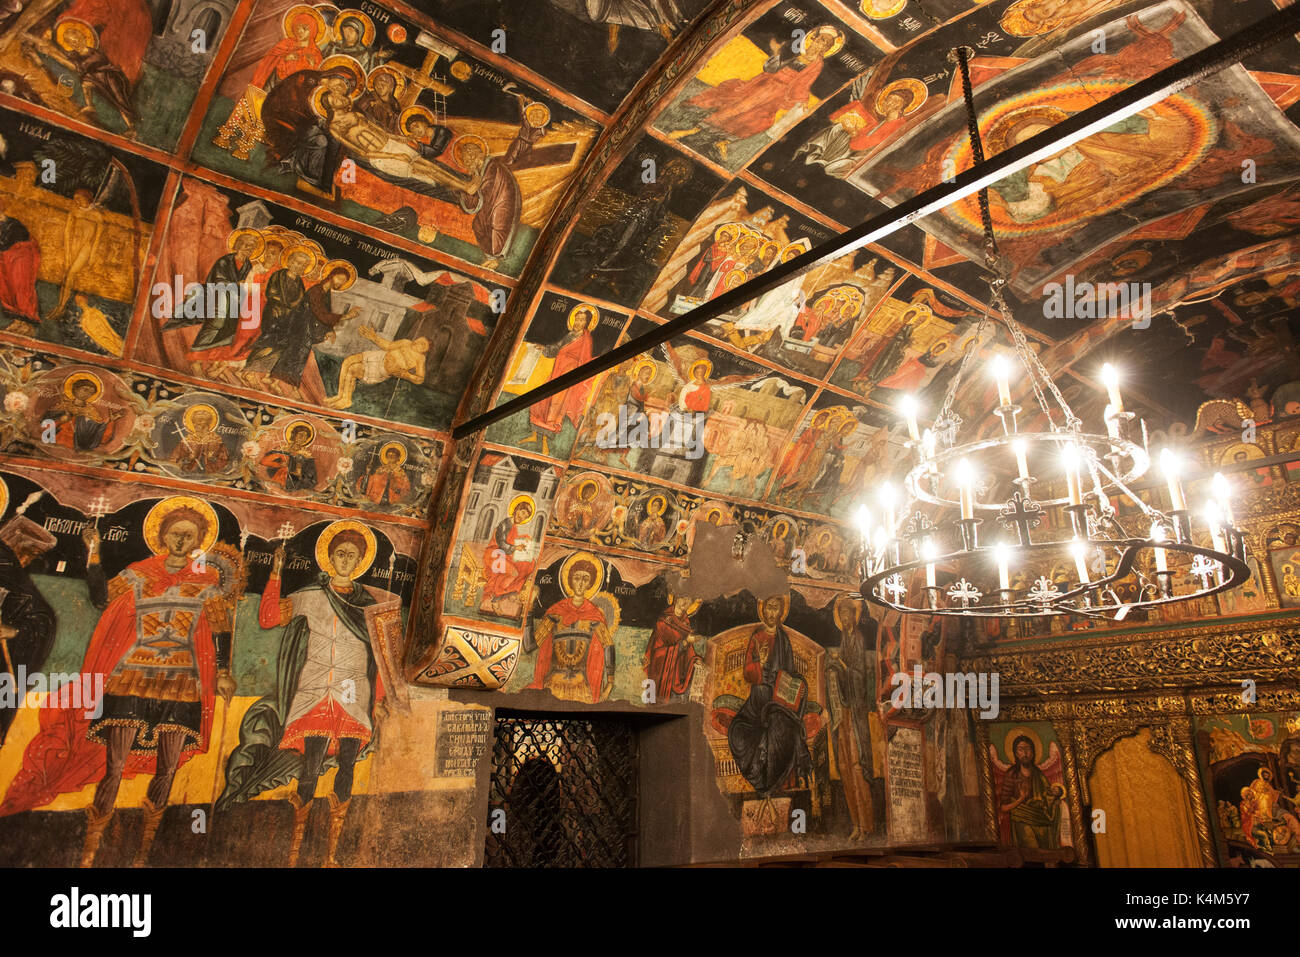 17th century frescos inside The Nativity Church in Arbanasi, also known as the Church of the Nativity of Christ. Stock Photo